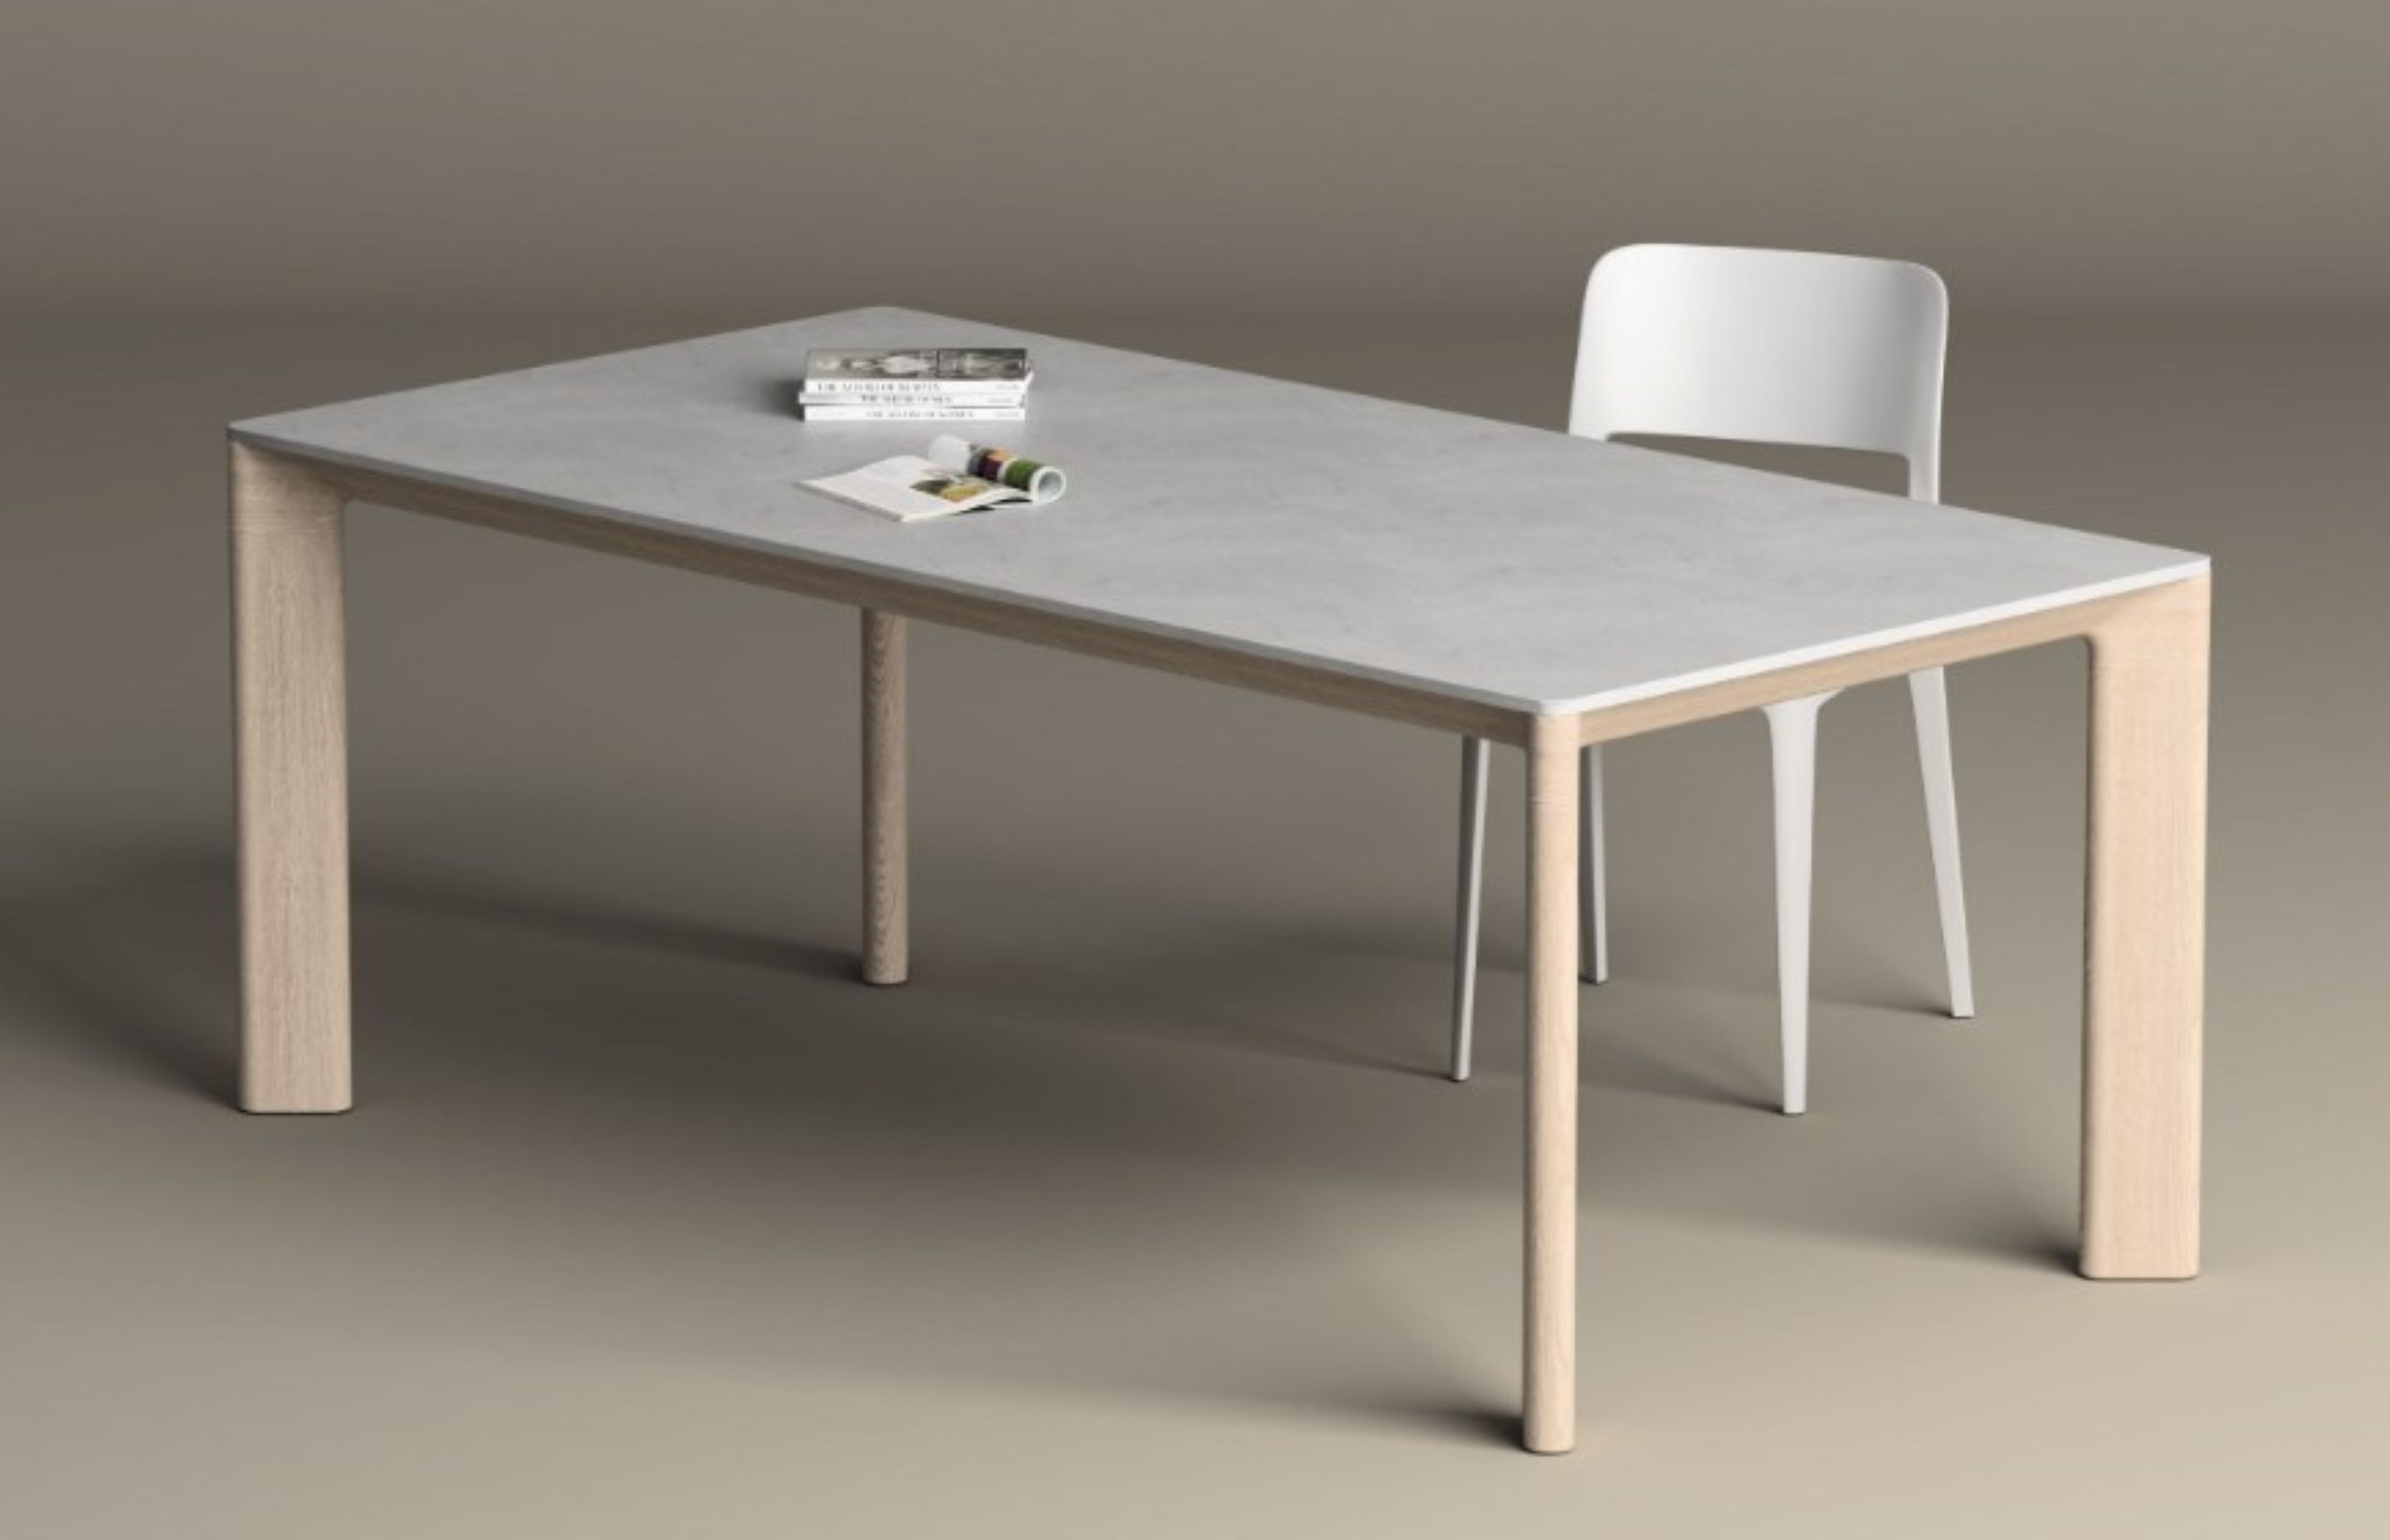 The Planum table by Midj features elegant contemporary proportions.